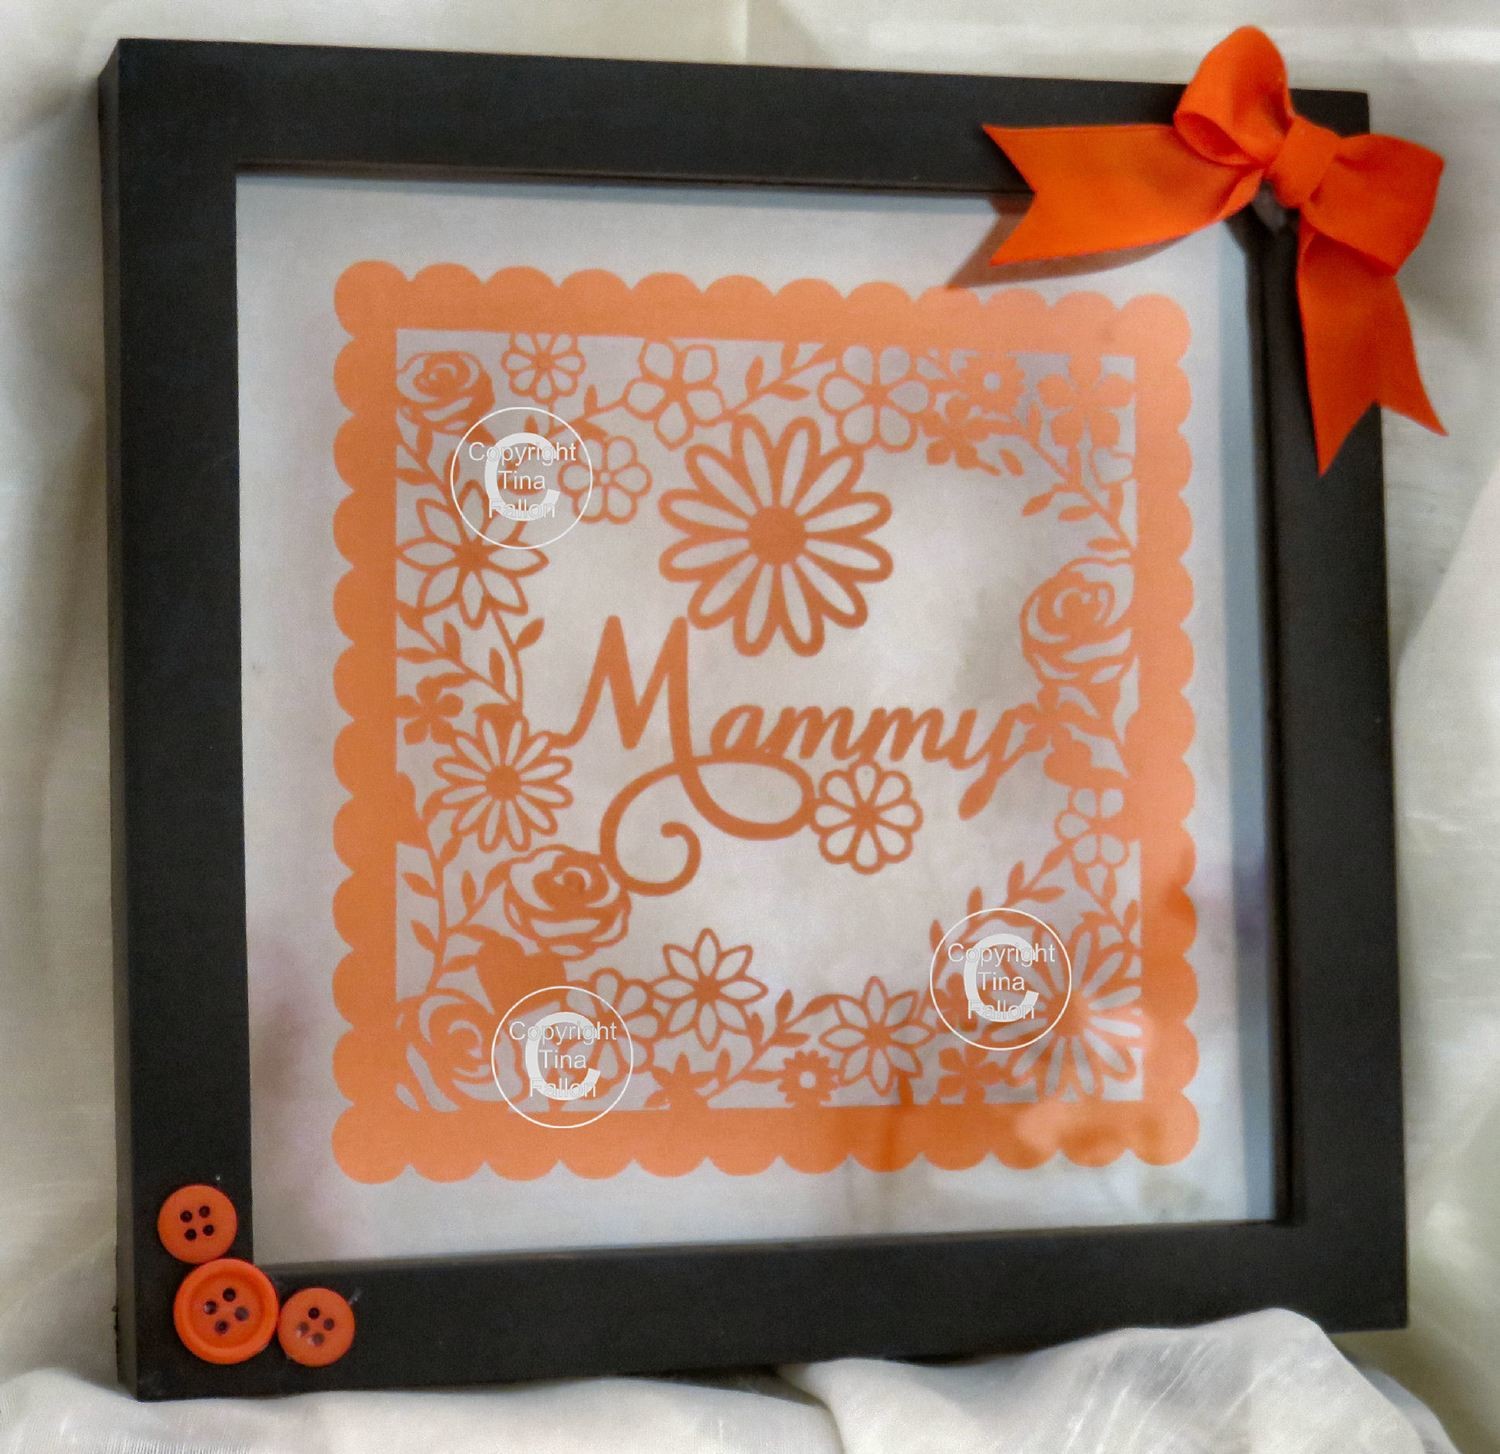 Mammy decorative frame ideal for Mother's Day.